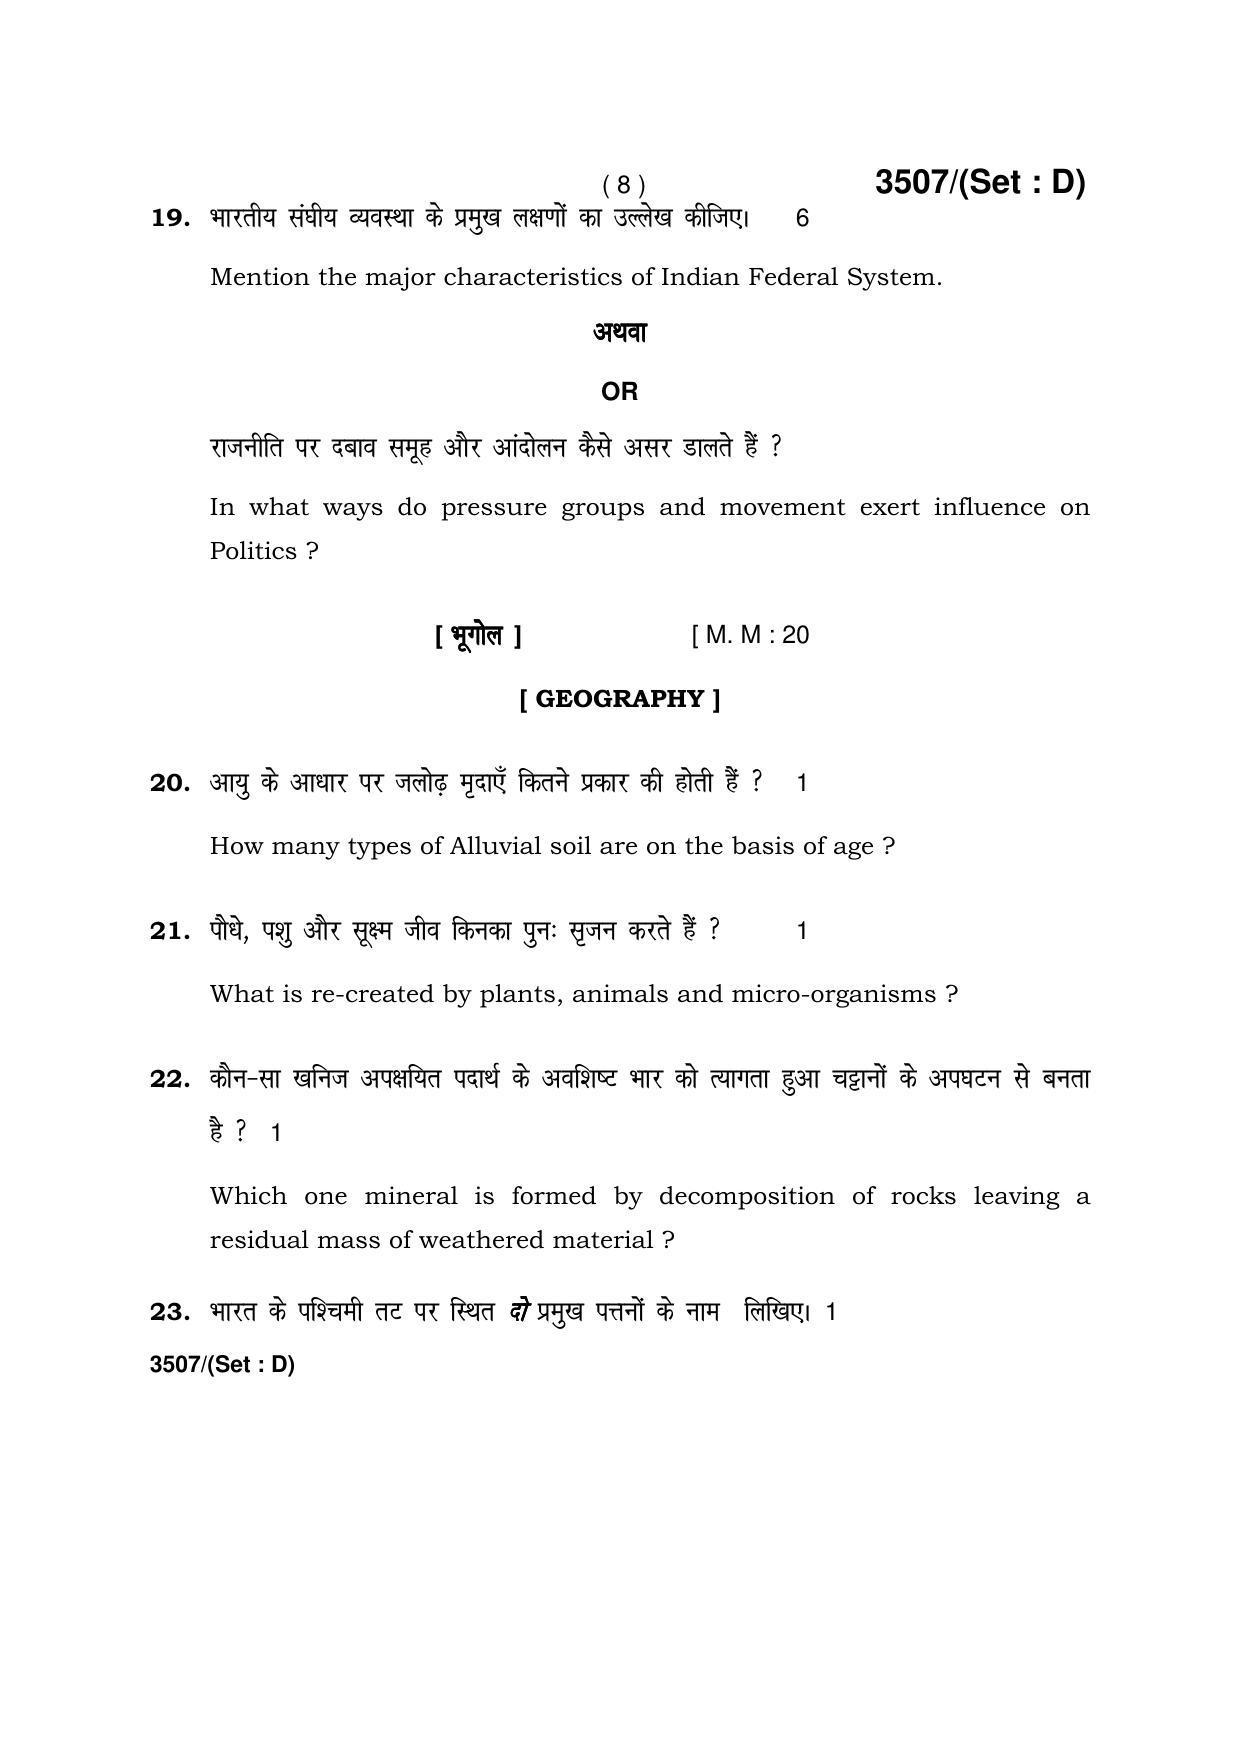 Haryana Board HBSE Class 10 Social Science -D 2018 Question Paper - Page 8